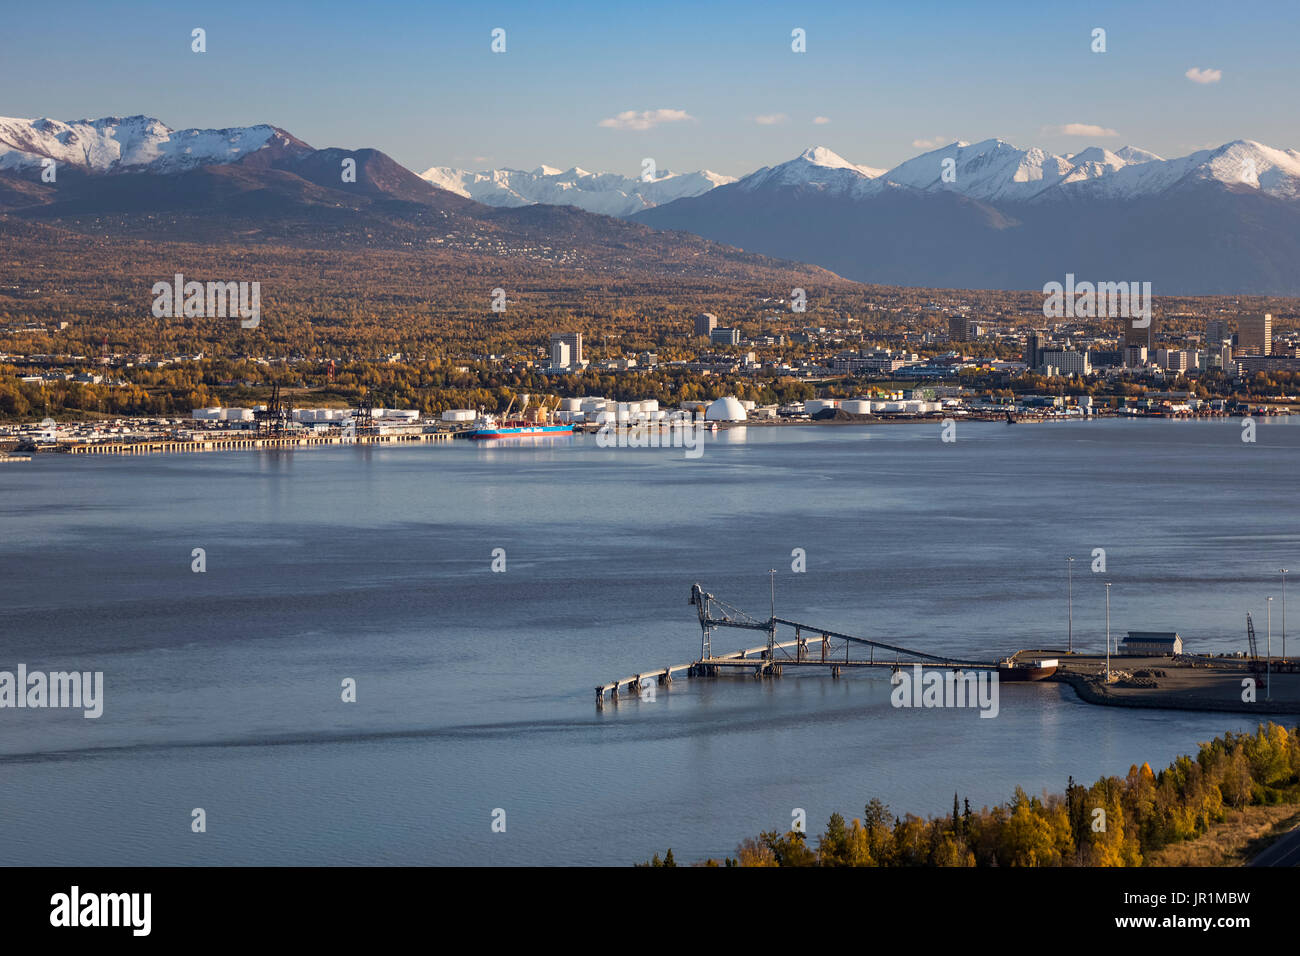 Aerial View Of Point Mackenzie Dock With Anchorage And The Chugach Mountains In The Background, Southcentral Alaska, USA Stock Photo